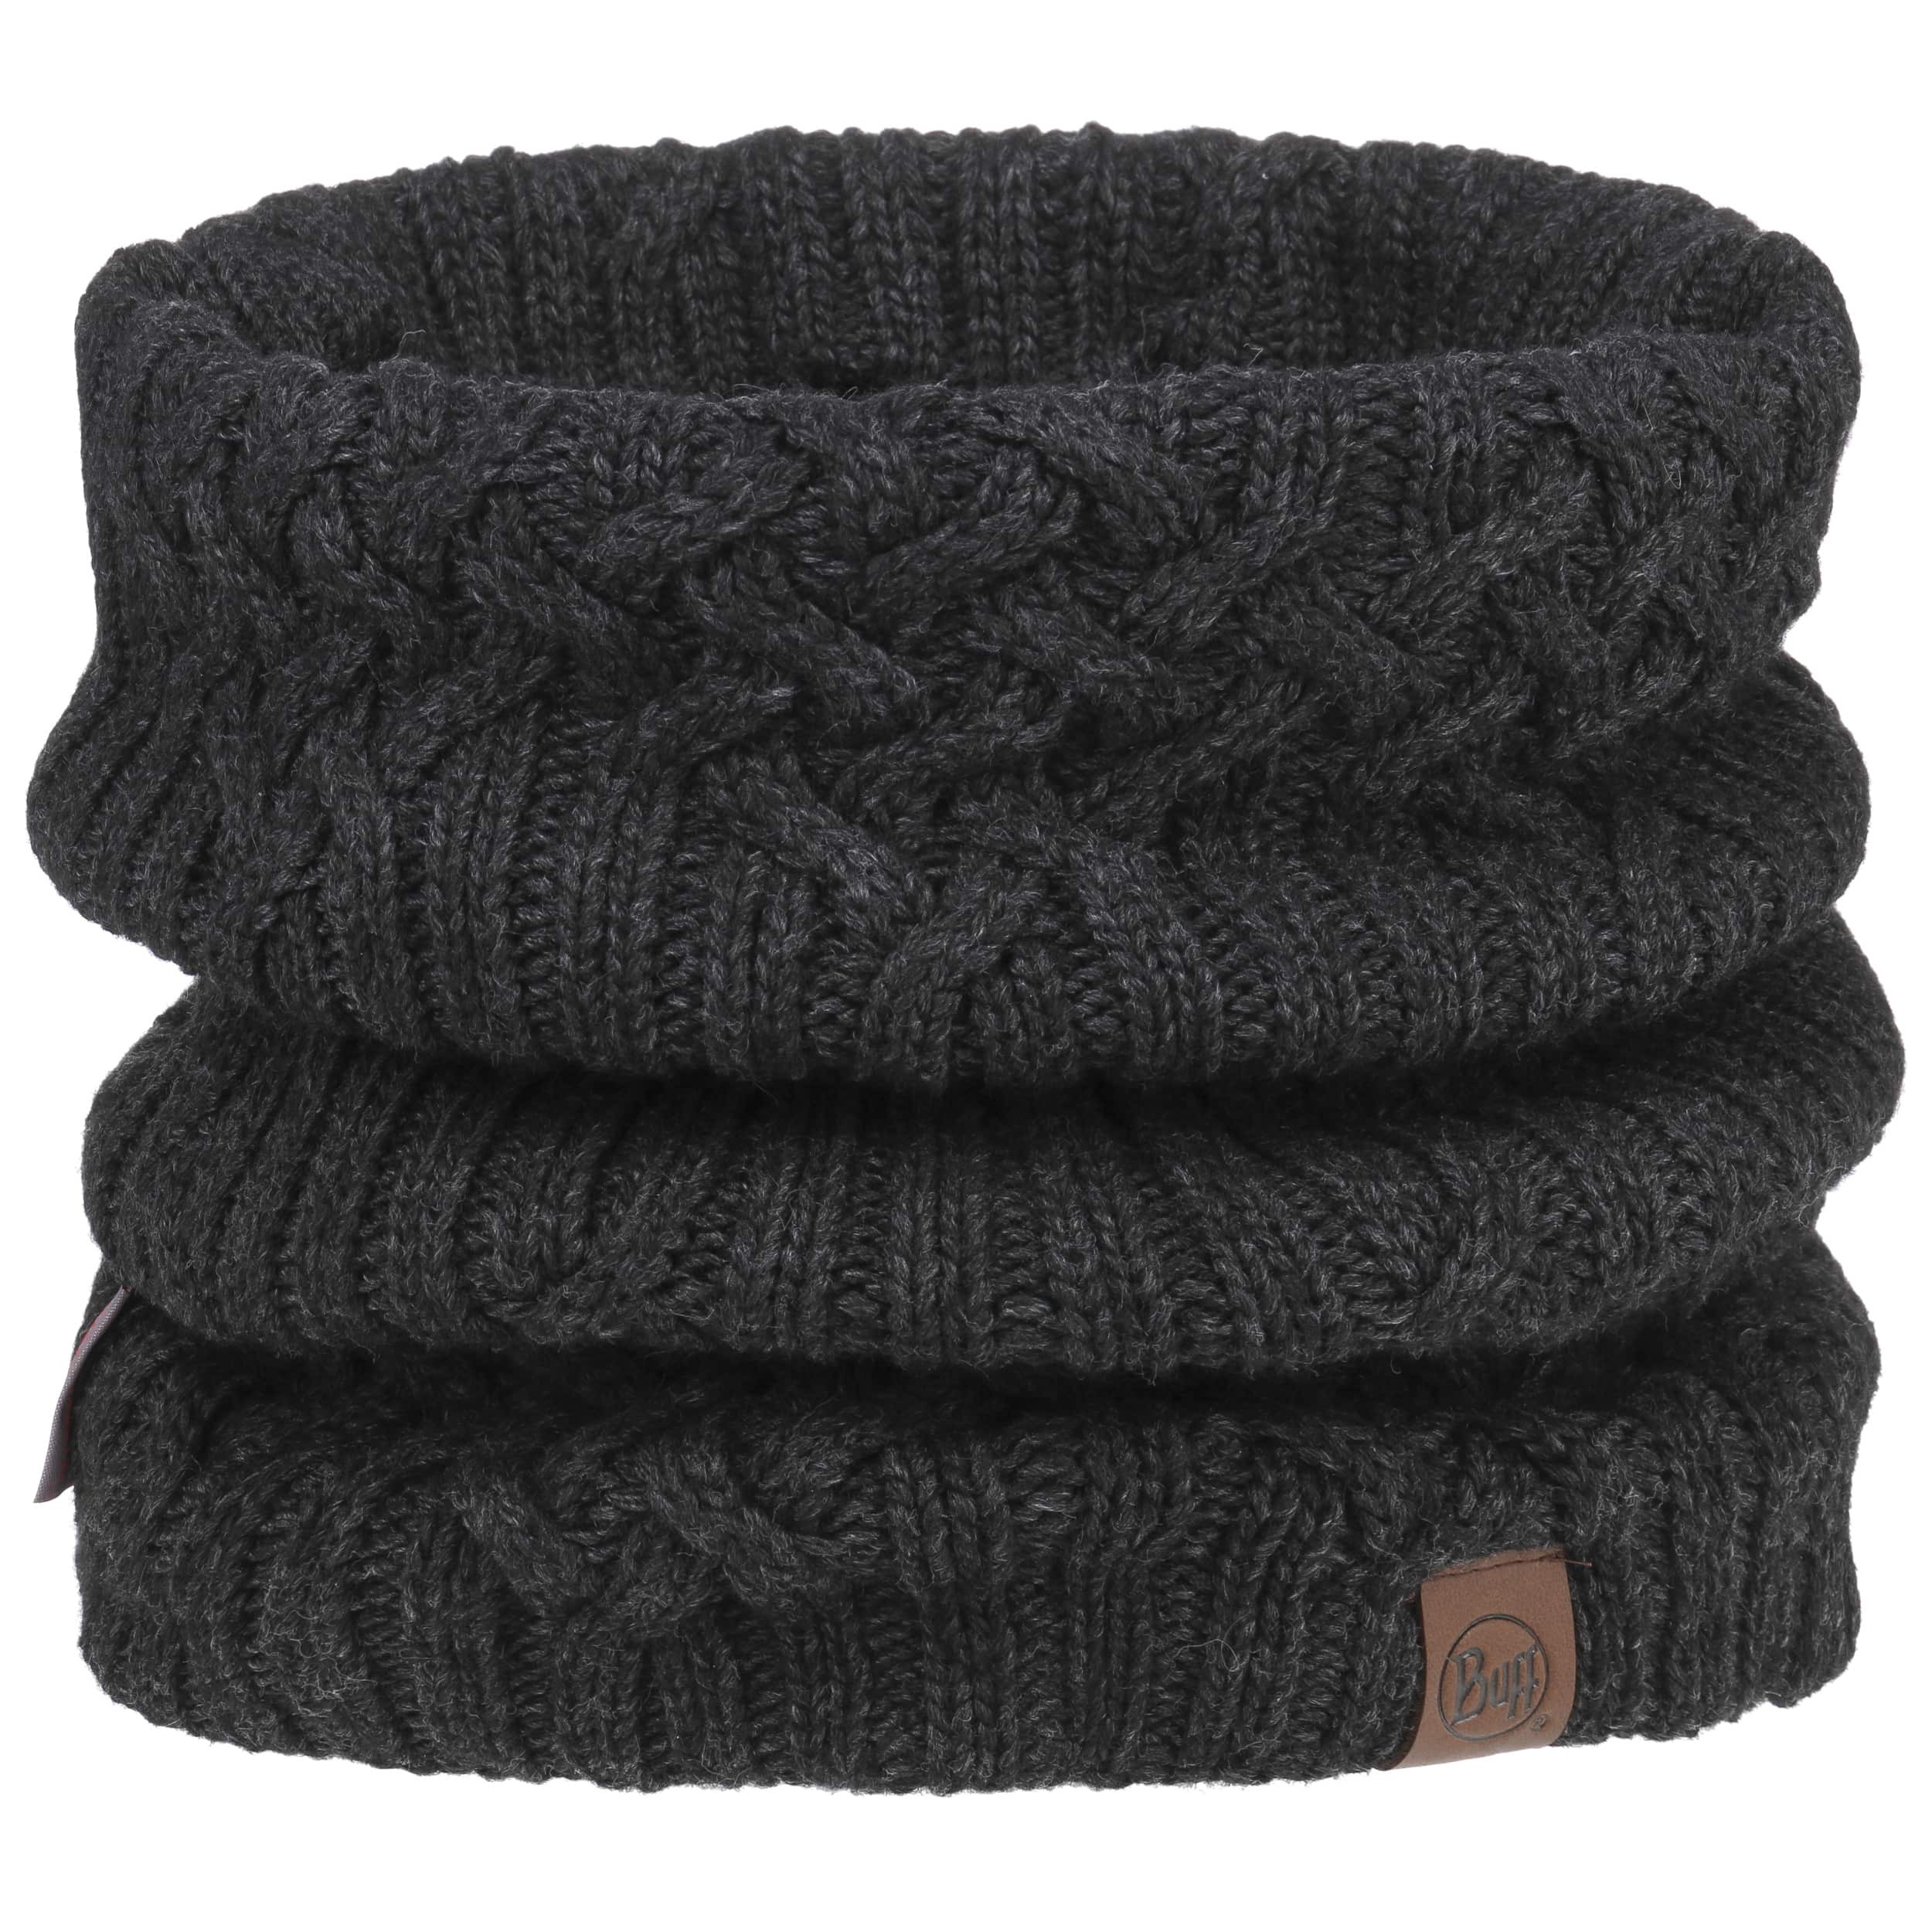 Lifestyle New Helle Neck Warmer by BUFF - 43,95